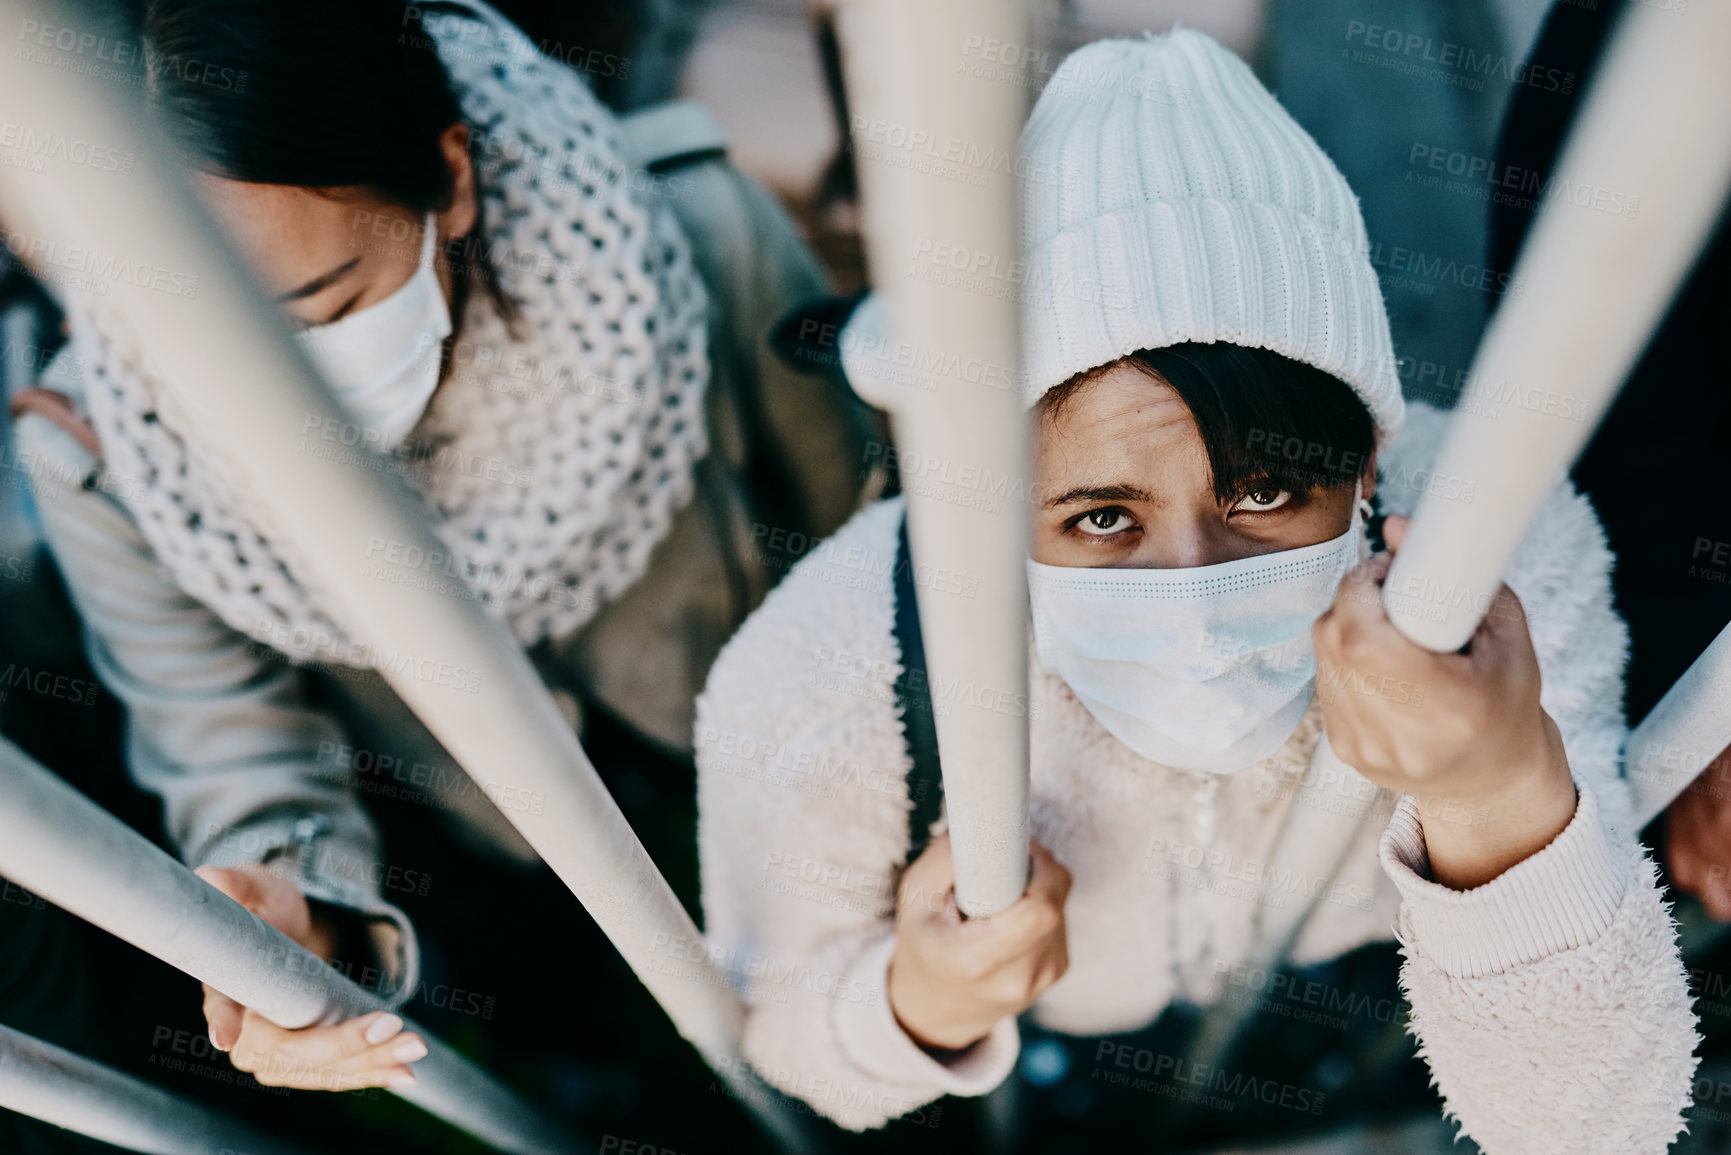 Buy stock photo Shot of a group of young people wearing masks while stuck behind a gate in a foreign city